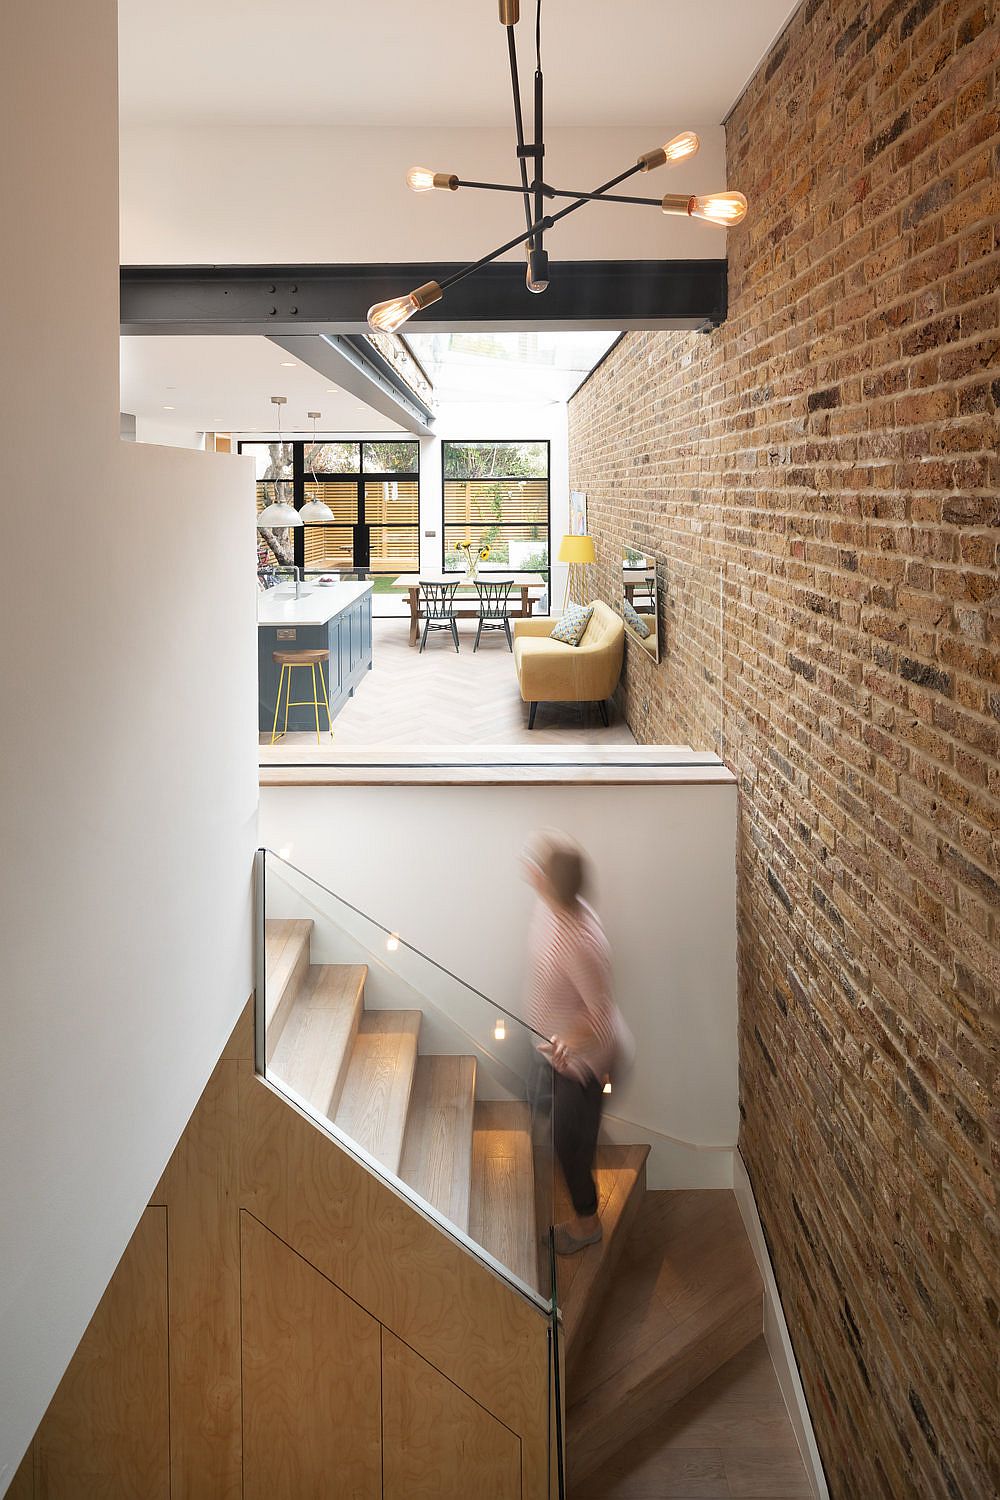 Staircase-leading-to-the-basement-level-of-the-revamped-British-house